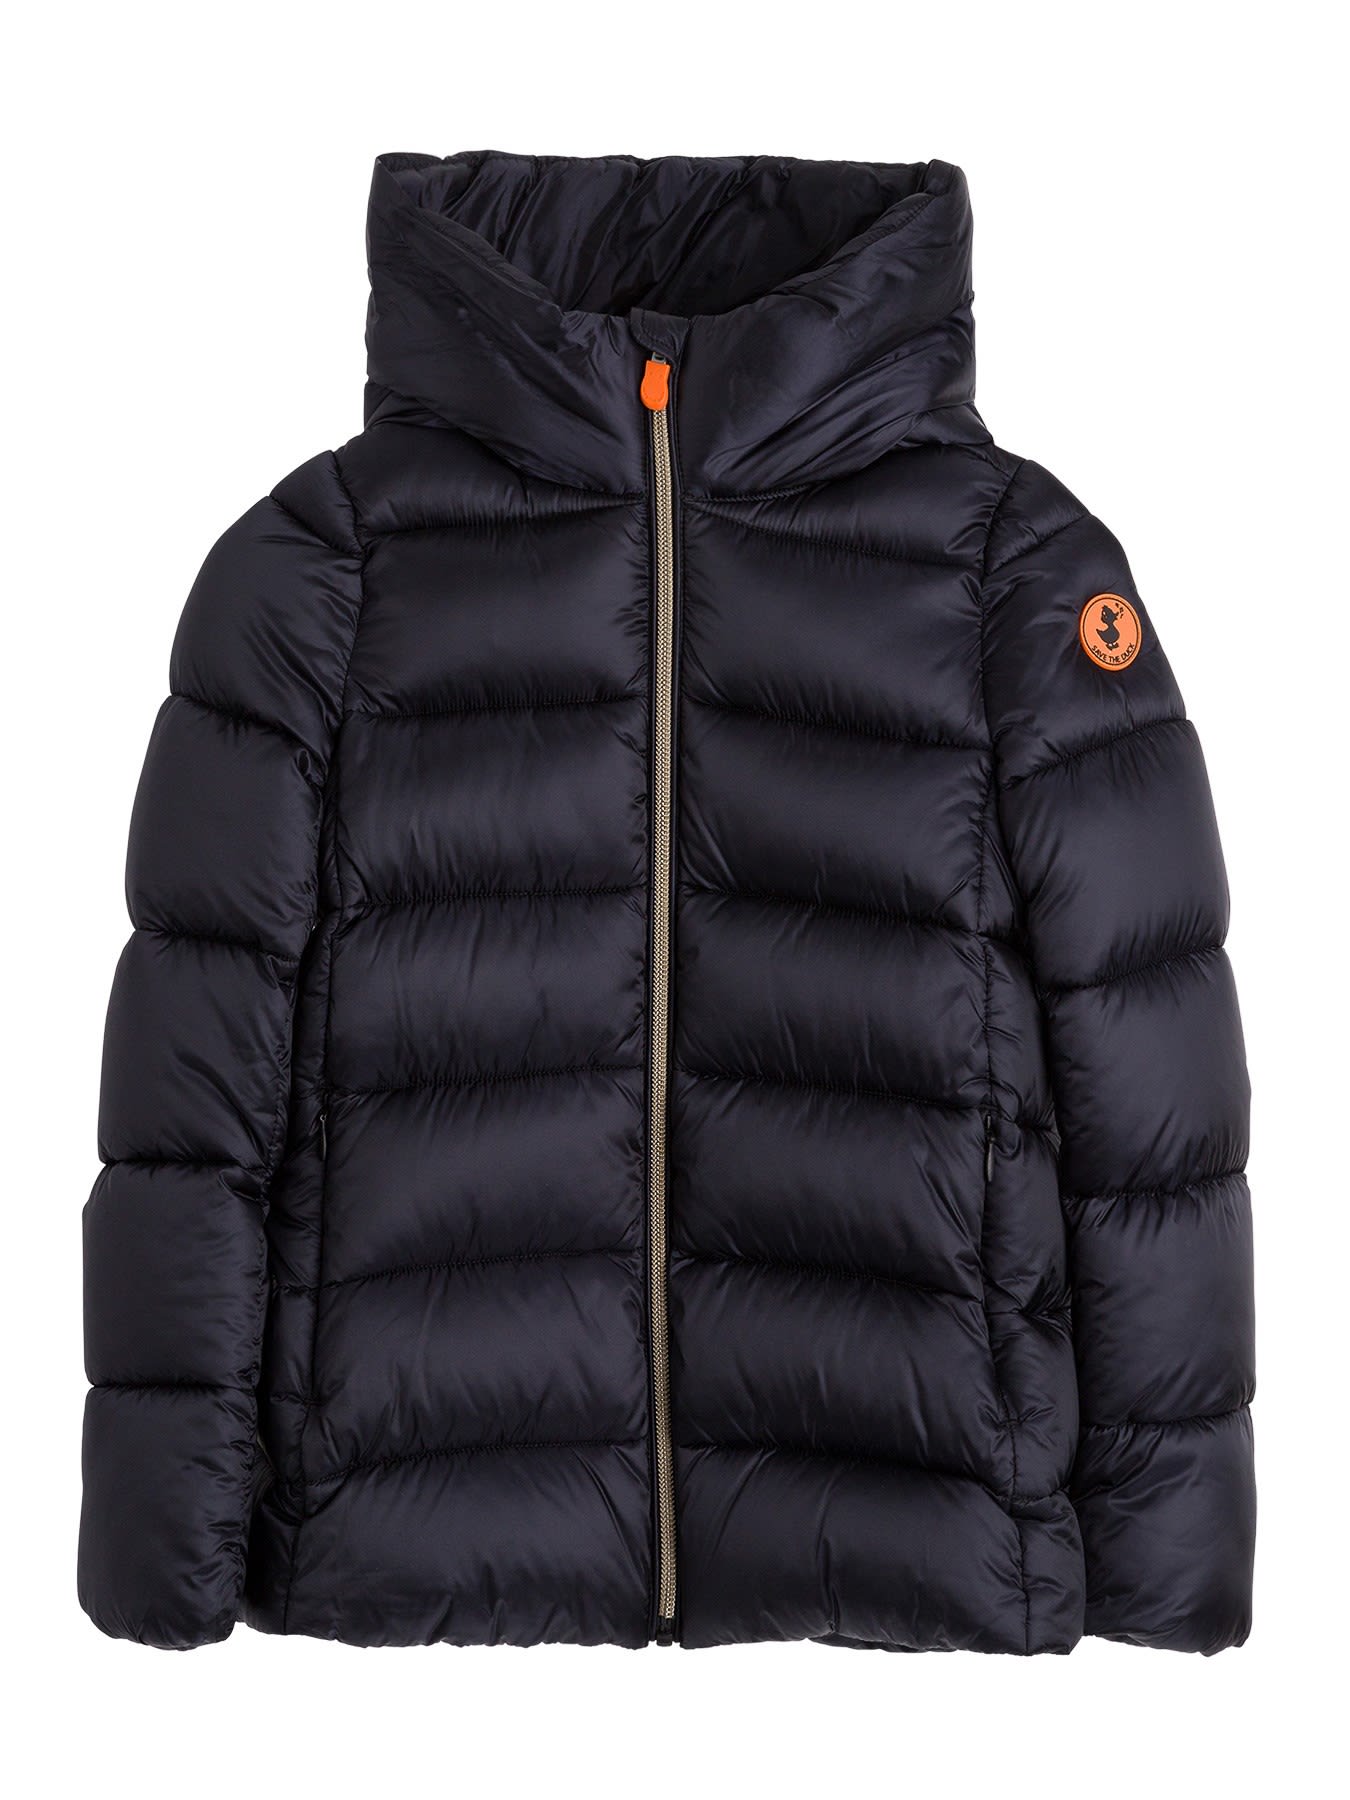 Save the Duck Hooded Puffer Jacket